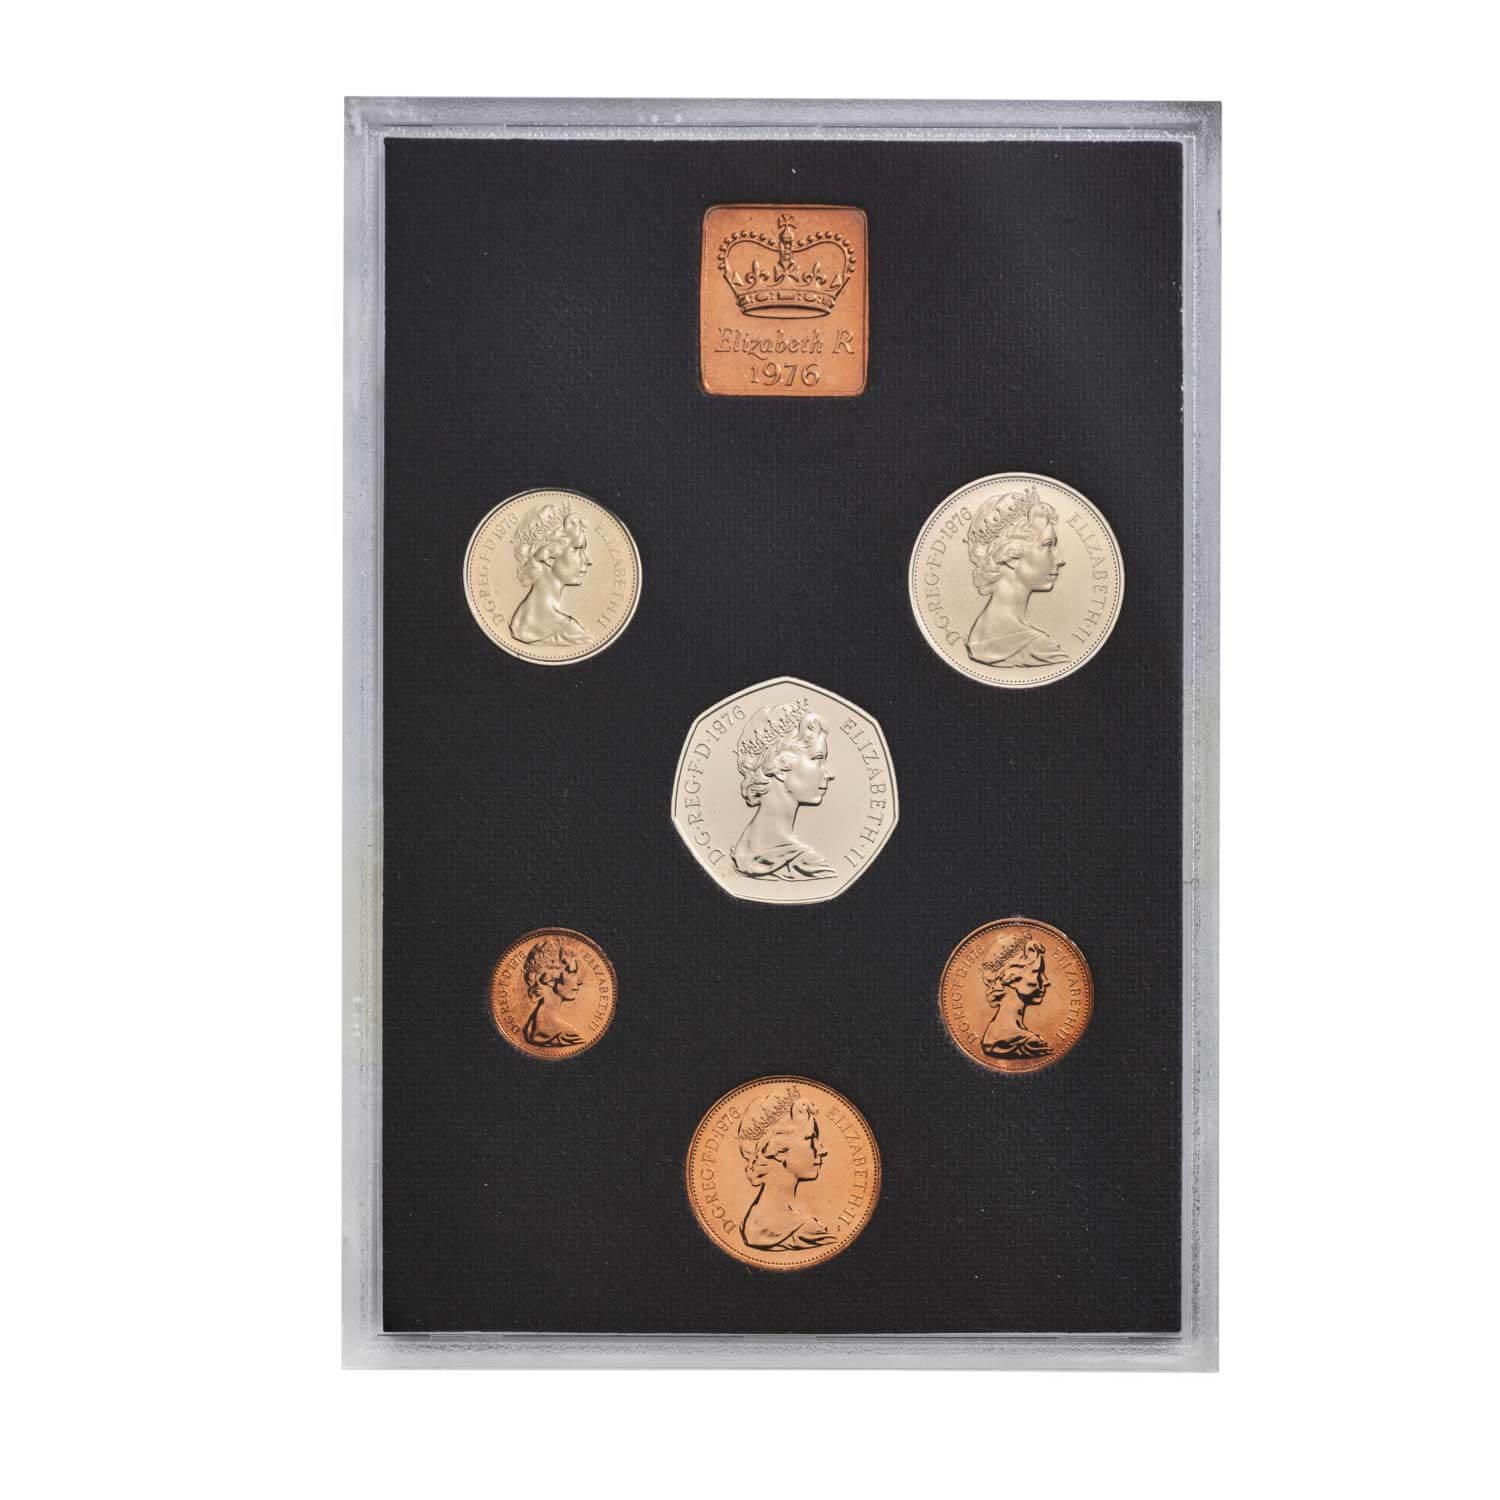 1976 UK Proof Annual 6 Coin Set - Loose Change Coins